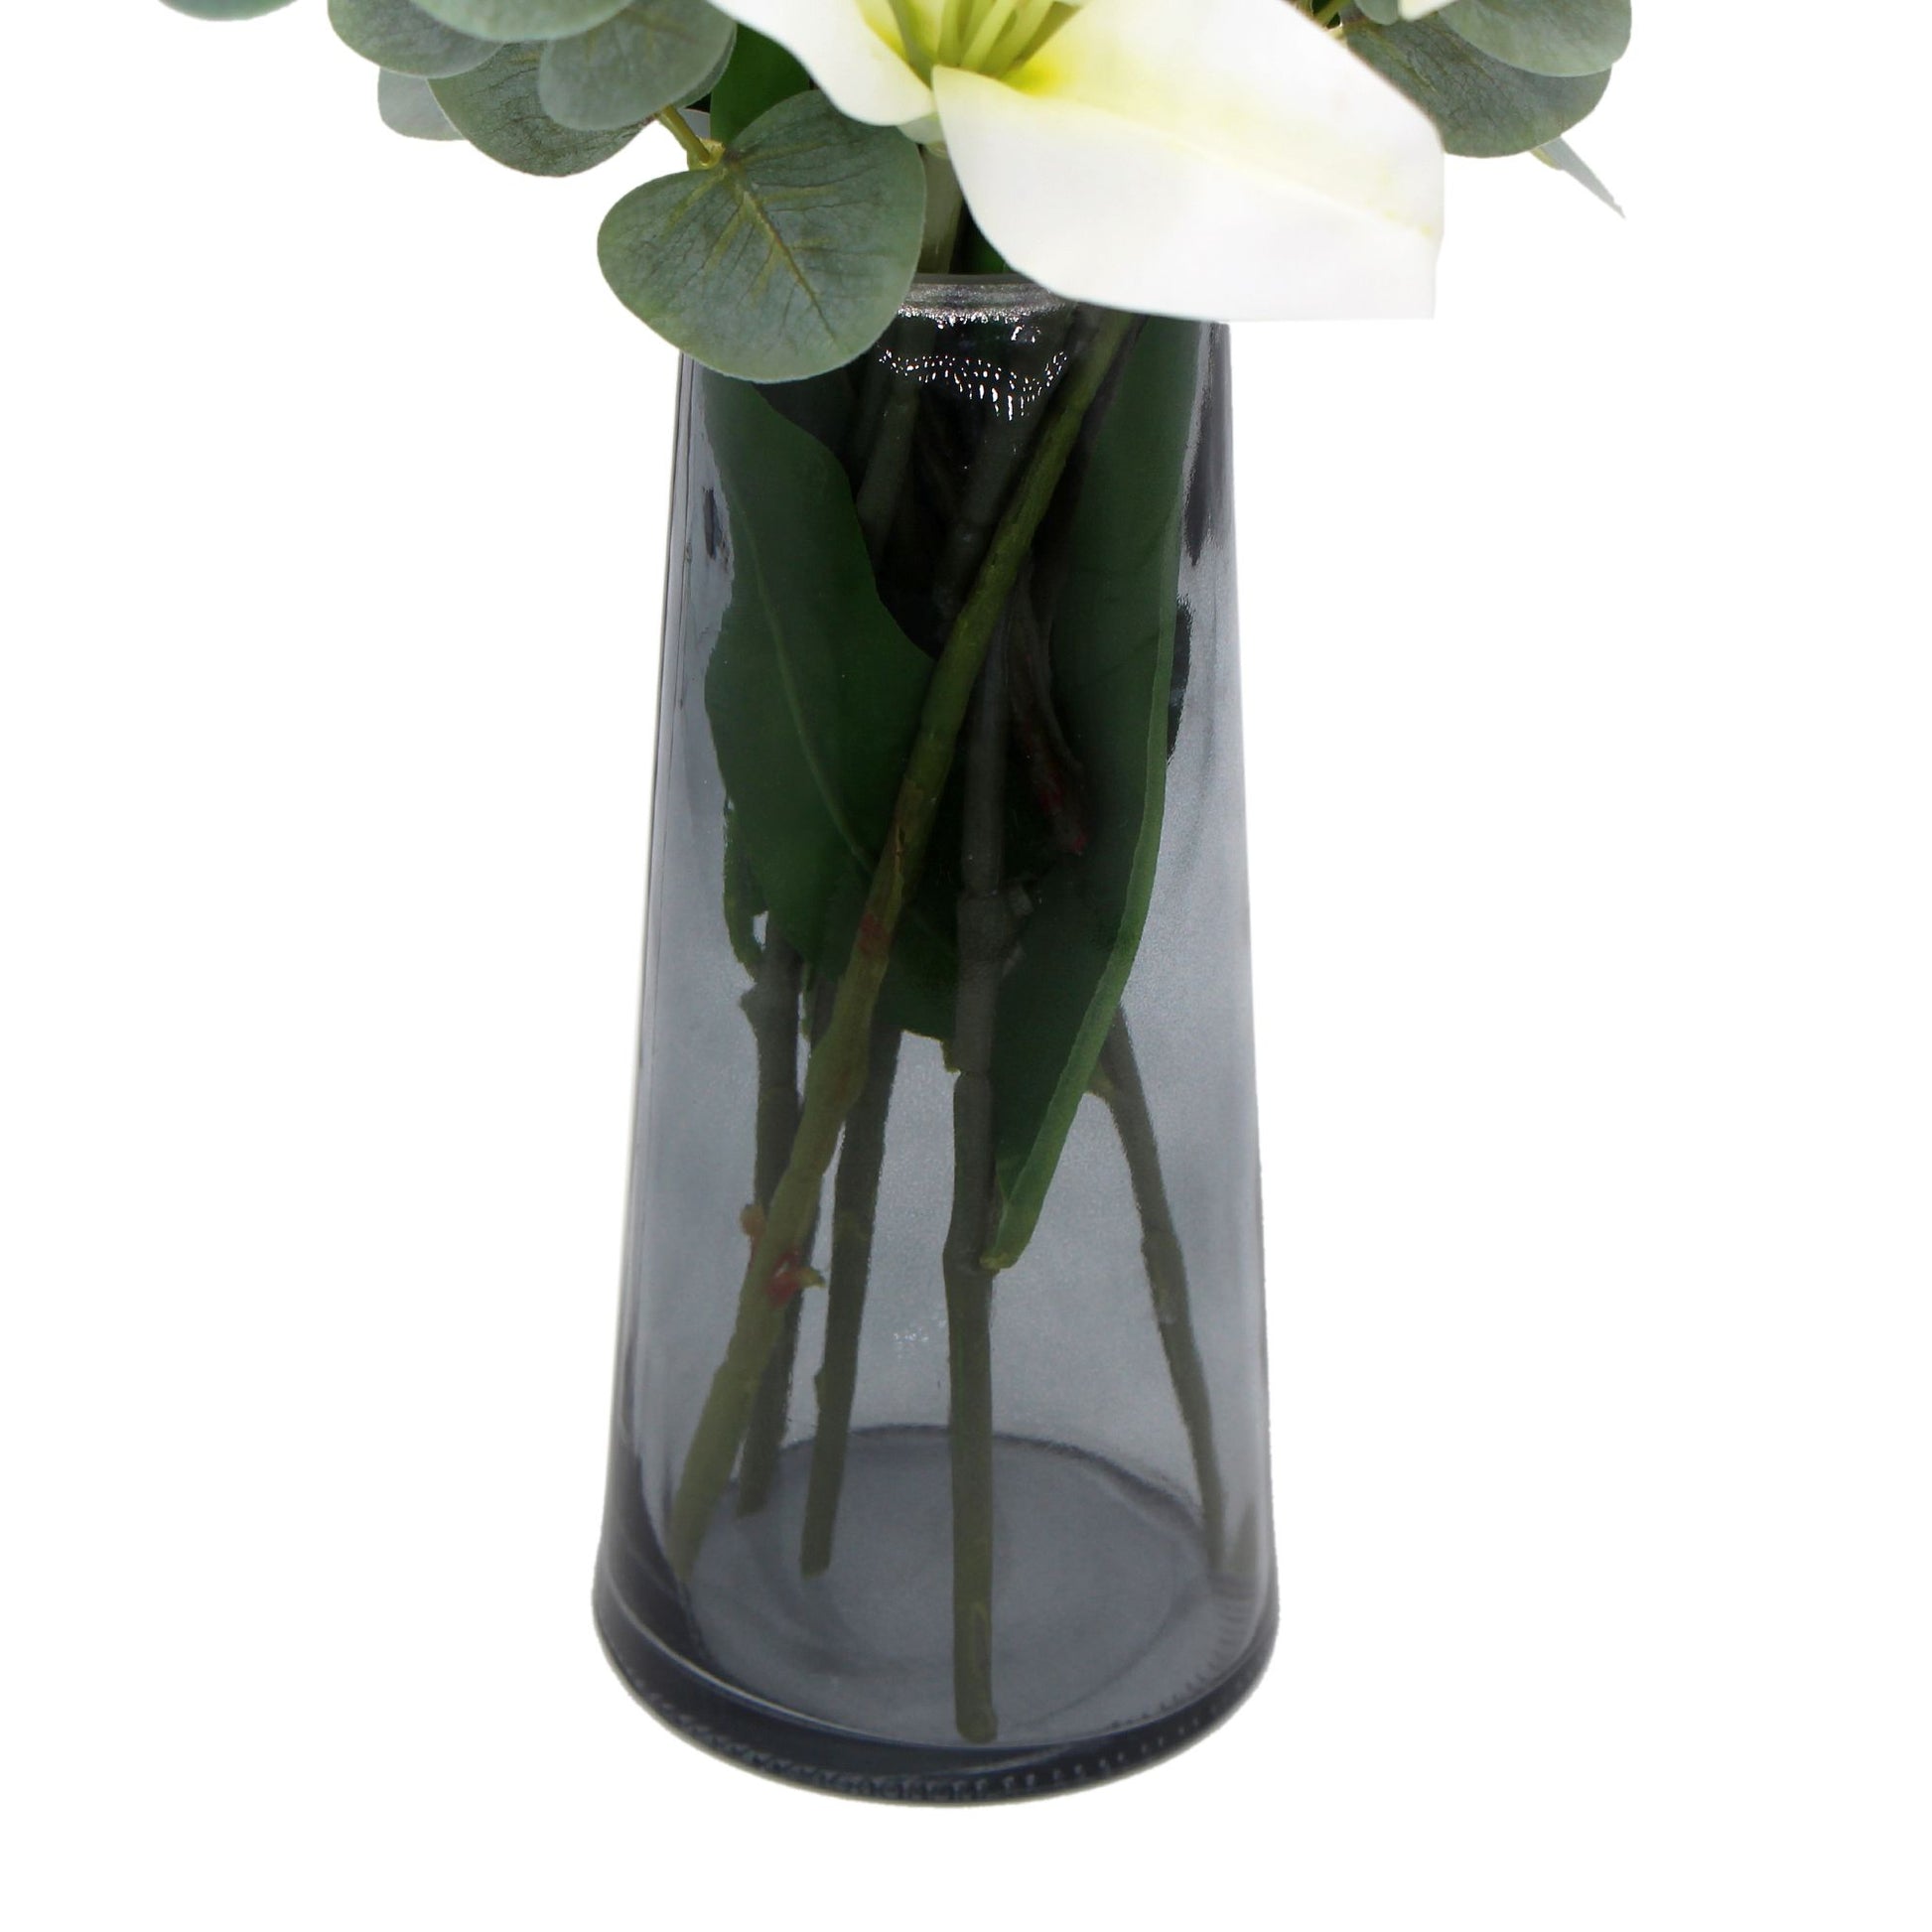 Premium Faux White Lily In Glass Vase (Tiger Lily Bouquet With Eucalyptus) - BM House & Garden